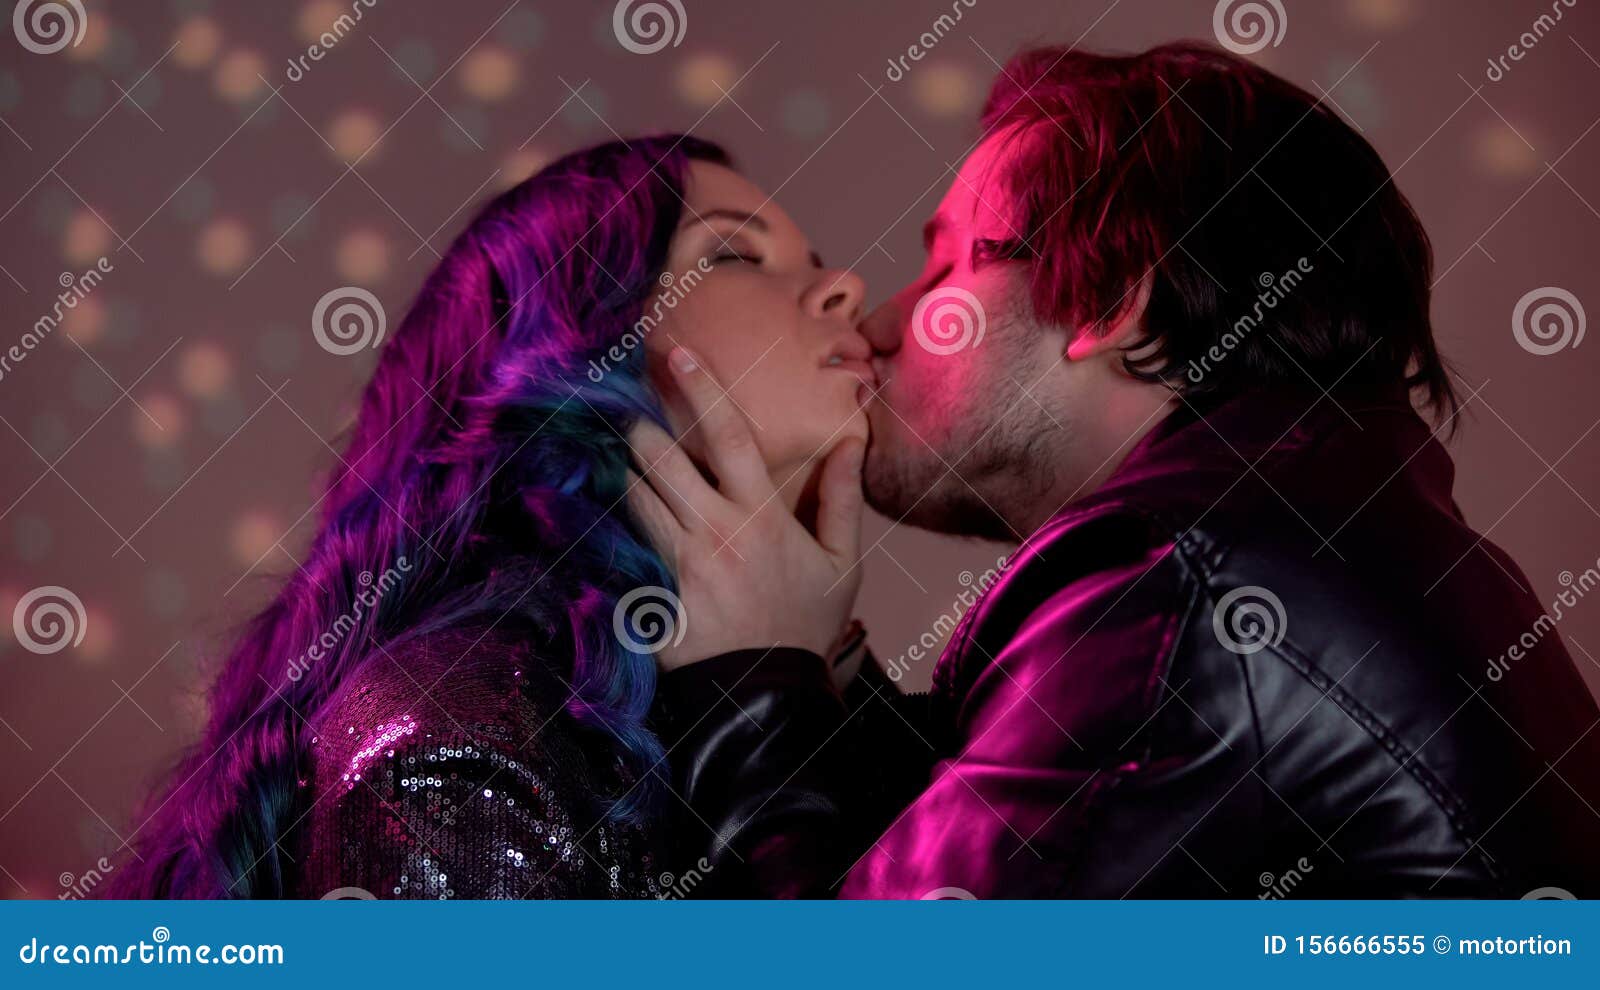 Drunk Couple Kissing Passionately at Nightclub Party, One Night Sex, Risk of Std Stock Image